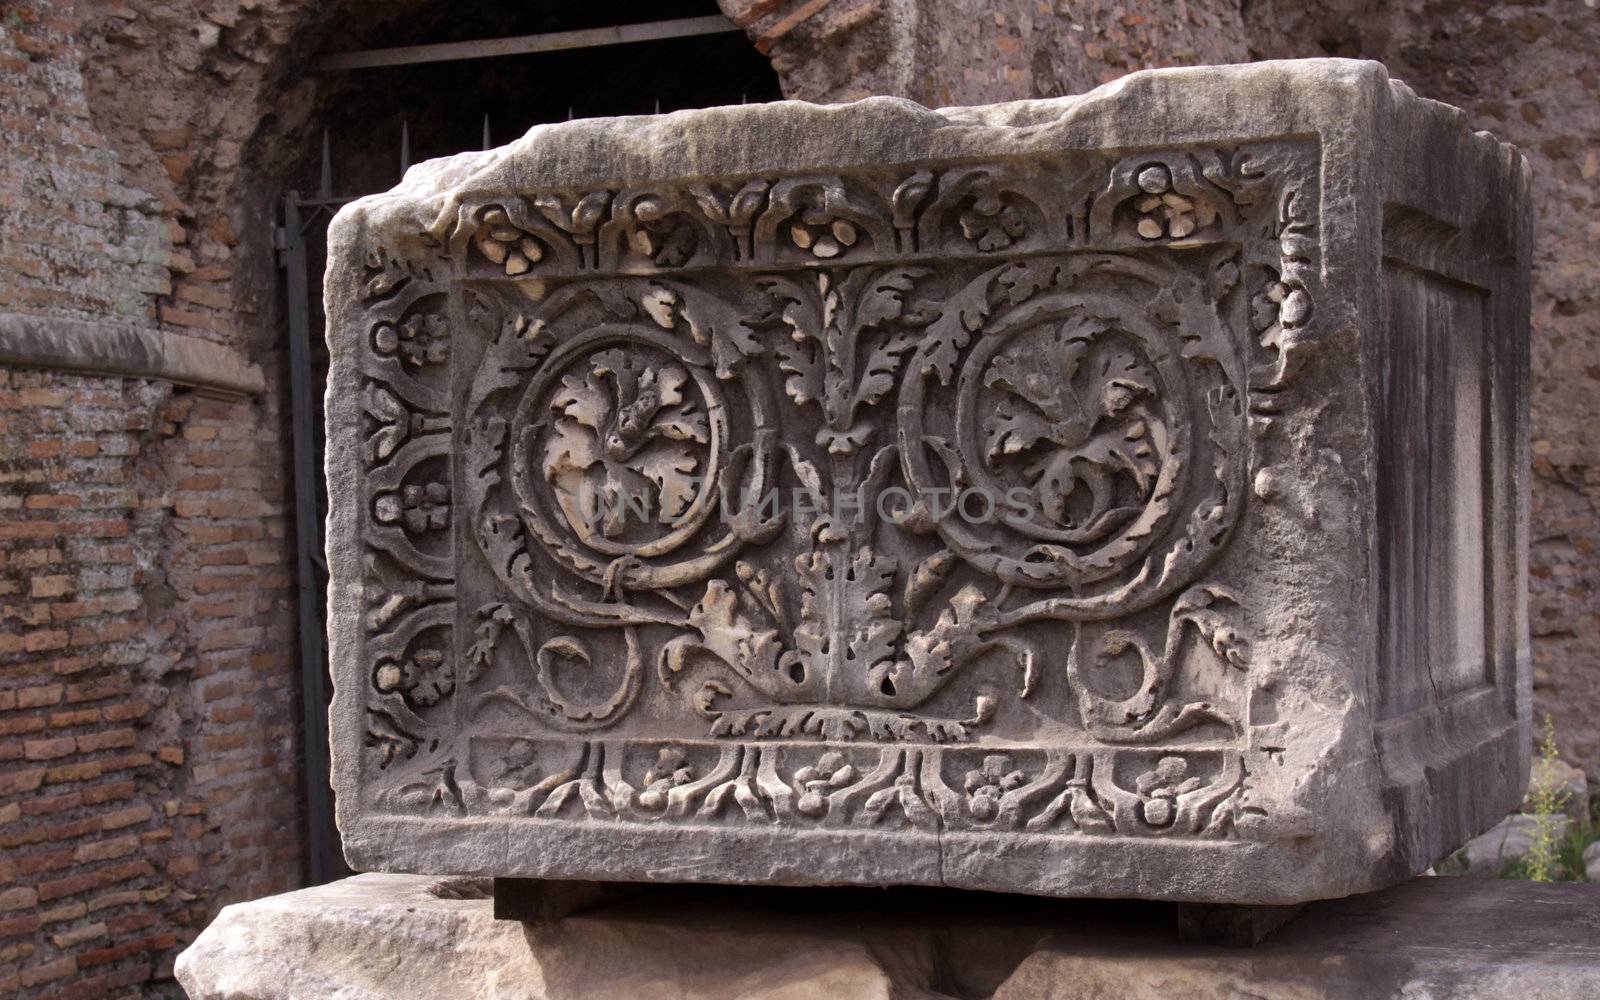 A stone block carved with a floral decoration created by the Roman Empire.  The block is located in the Roman Forum in Rome, Italy. 